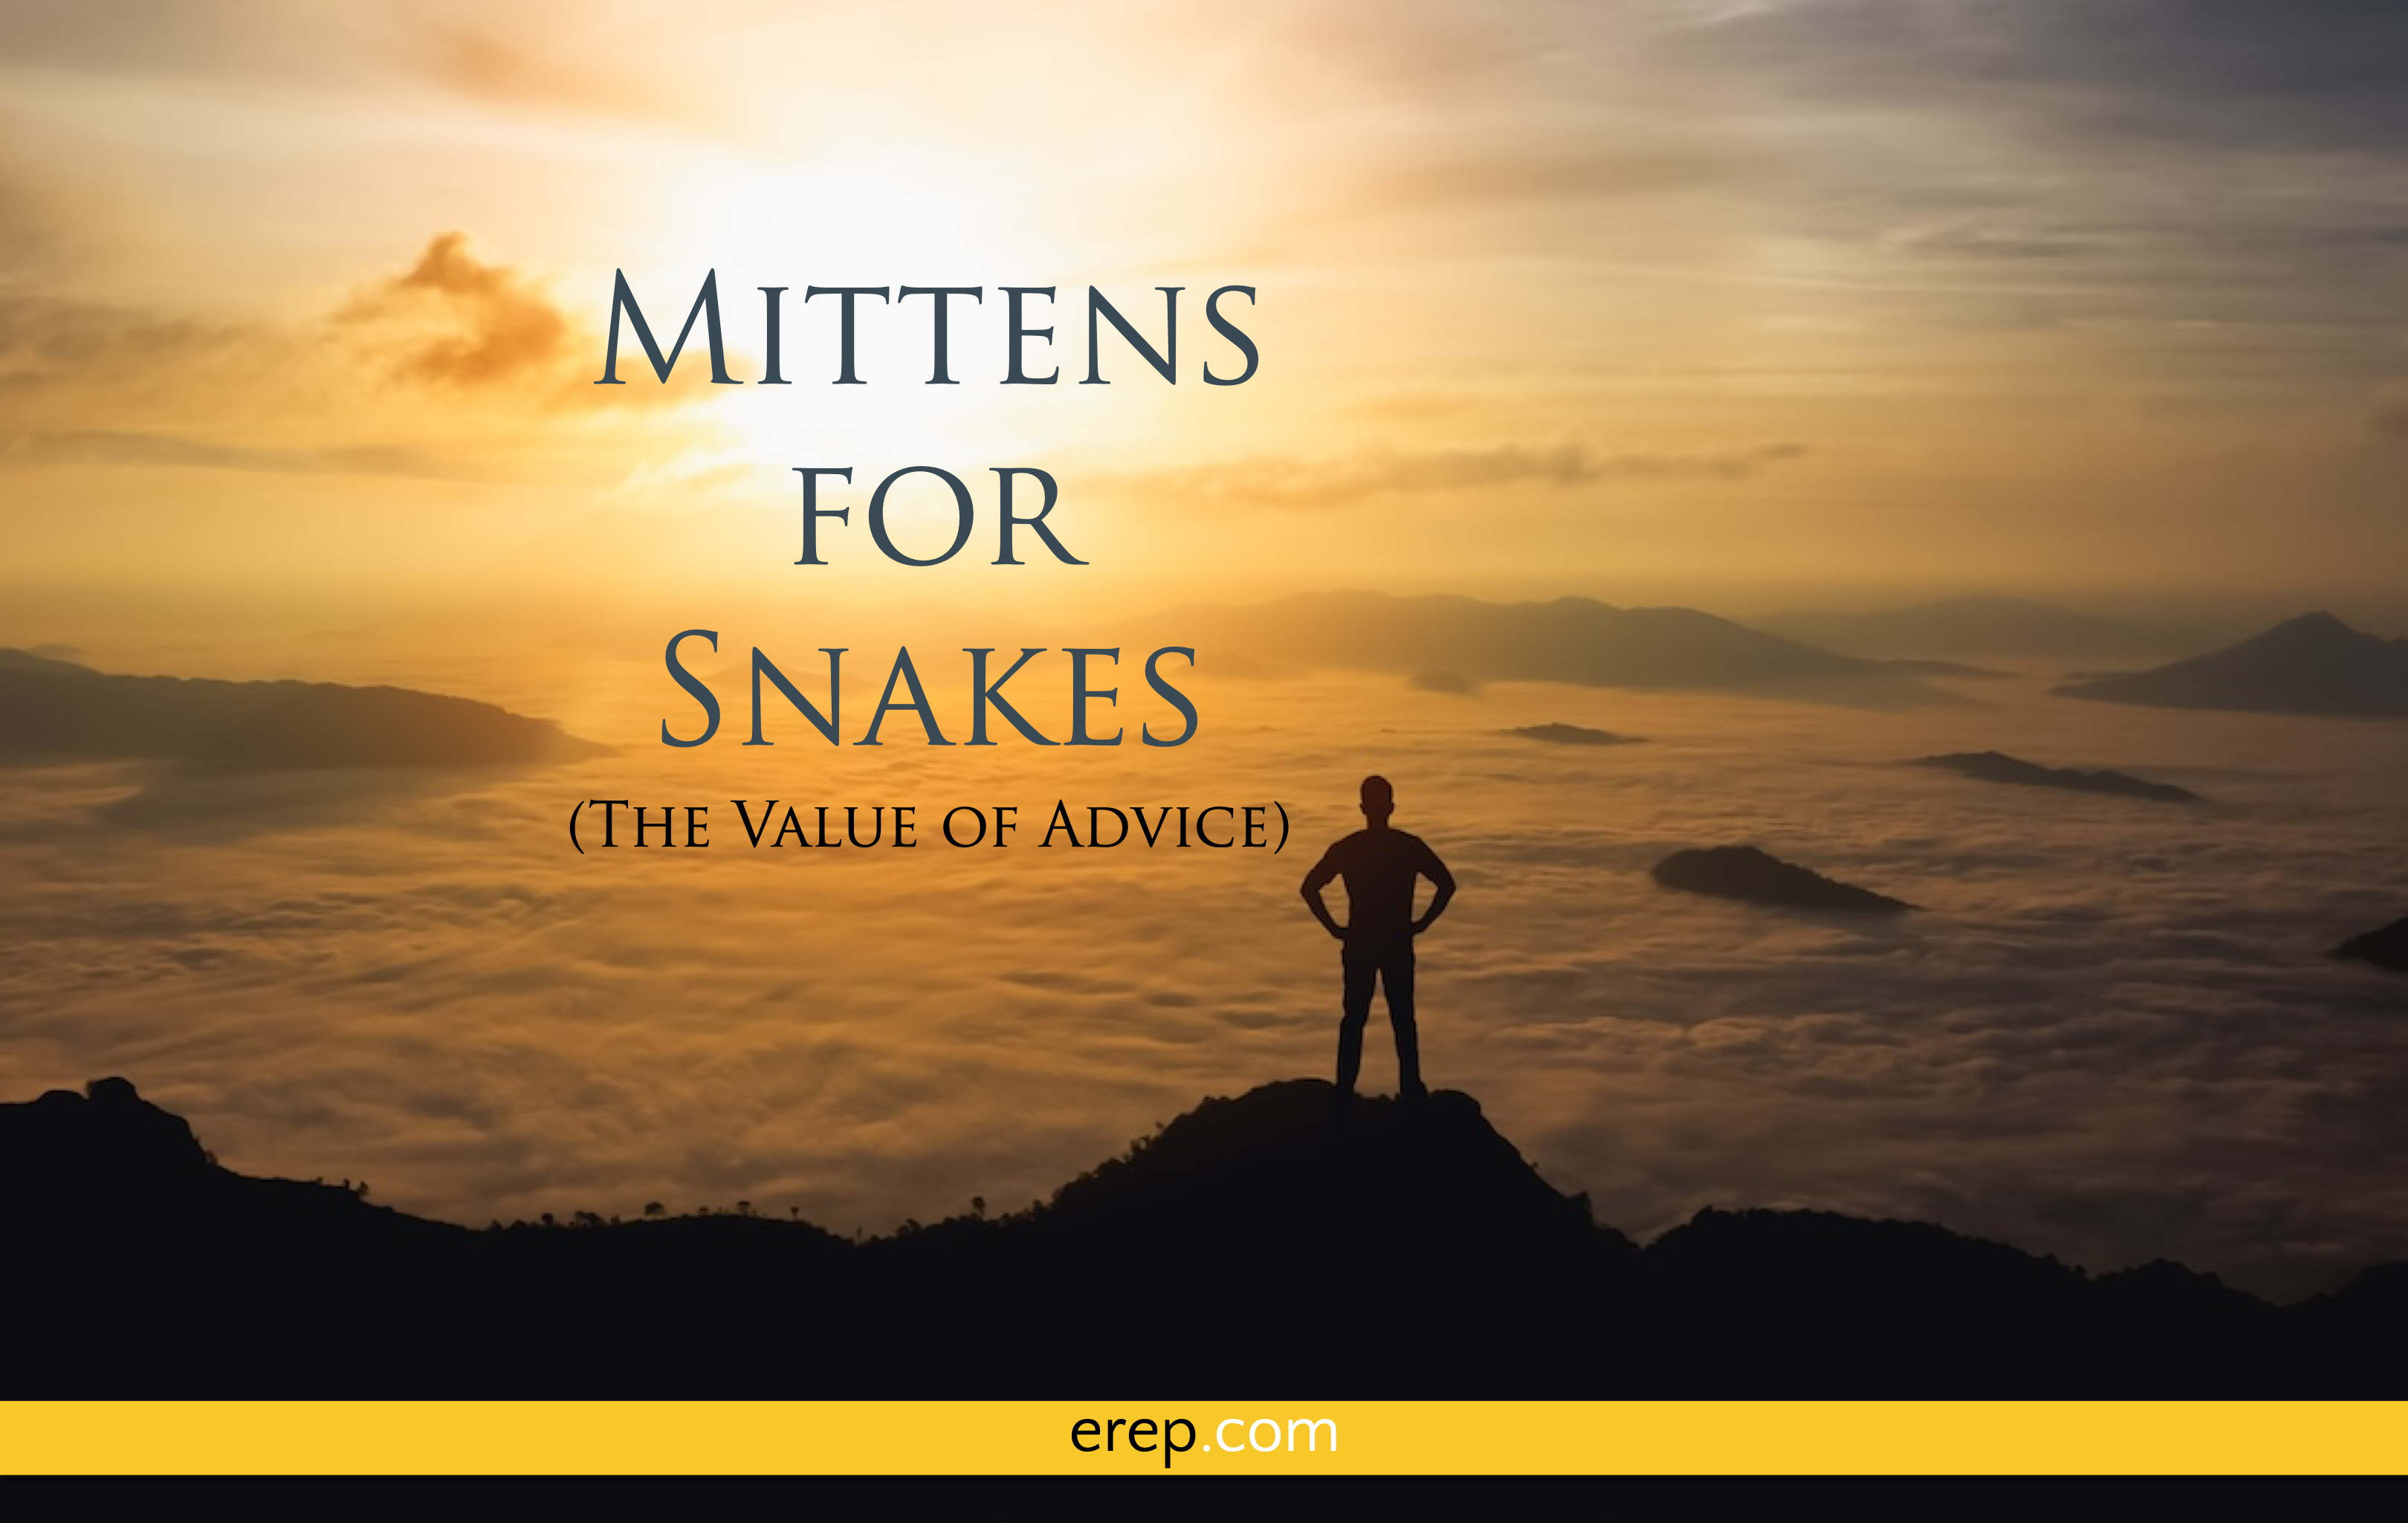 Mittens for Snakes (The Value of Advice)